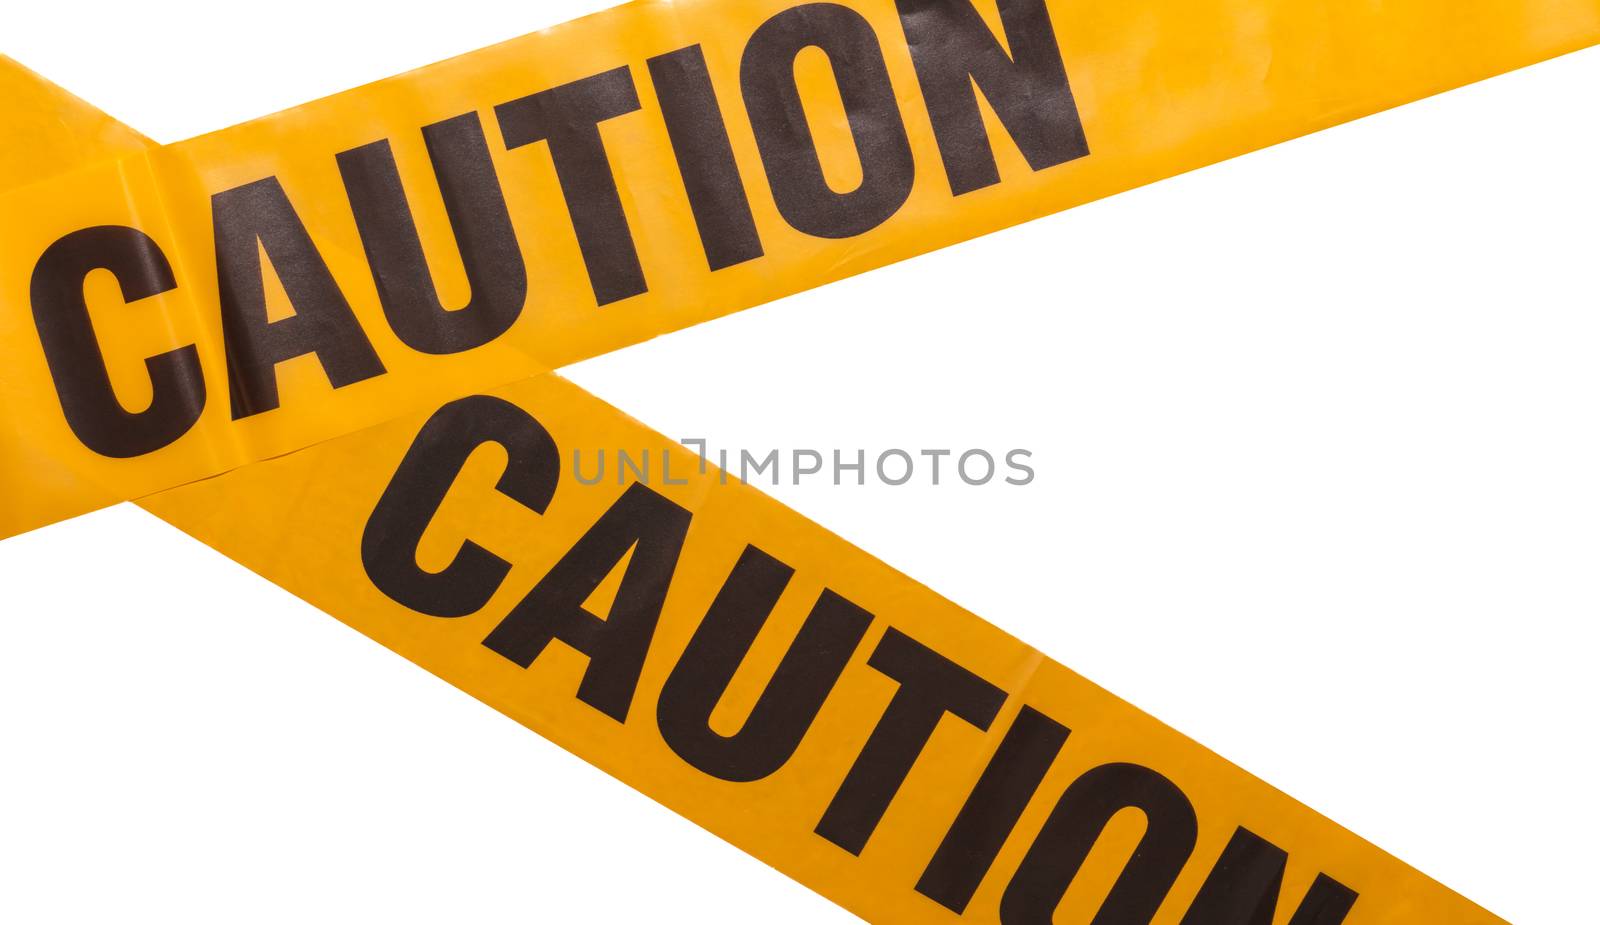 Yellow caution tapes crossing. Isolated. White background. Protection against viruses, bacteria, and germs. Quarantine area. Police barrier.